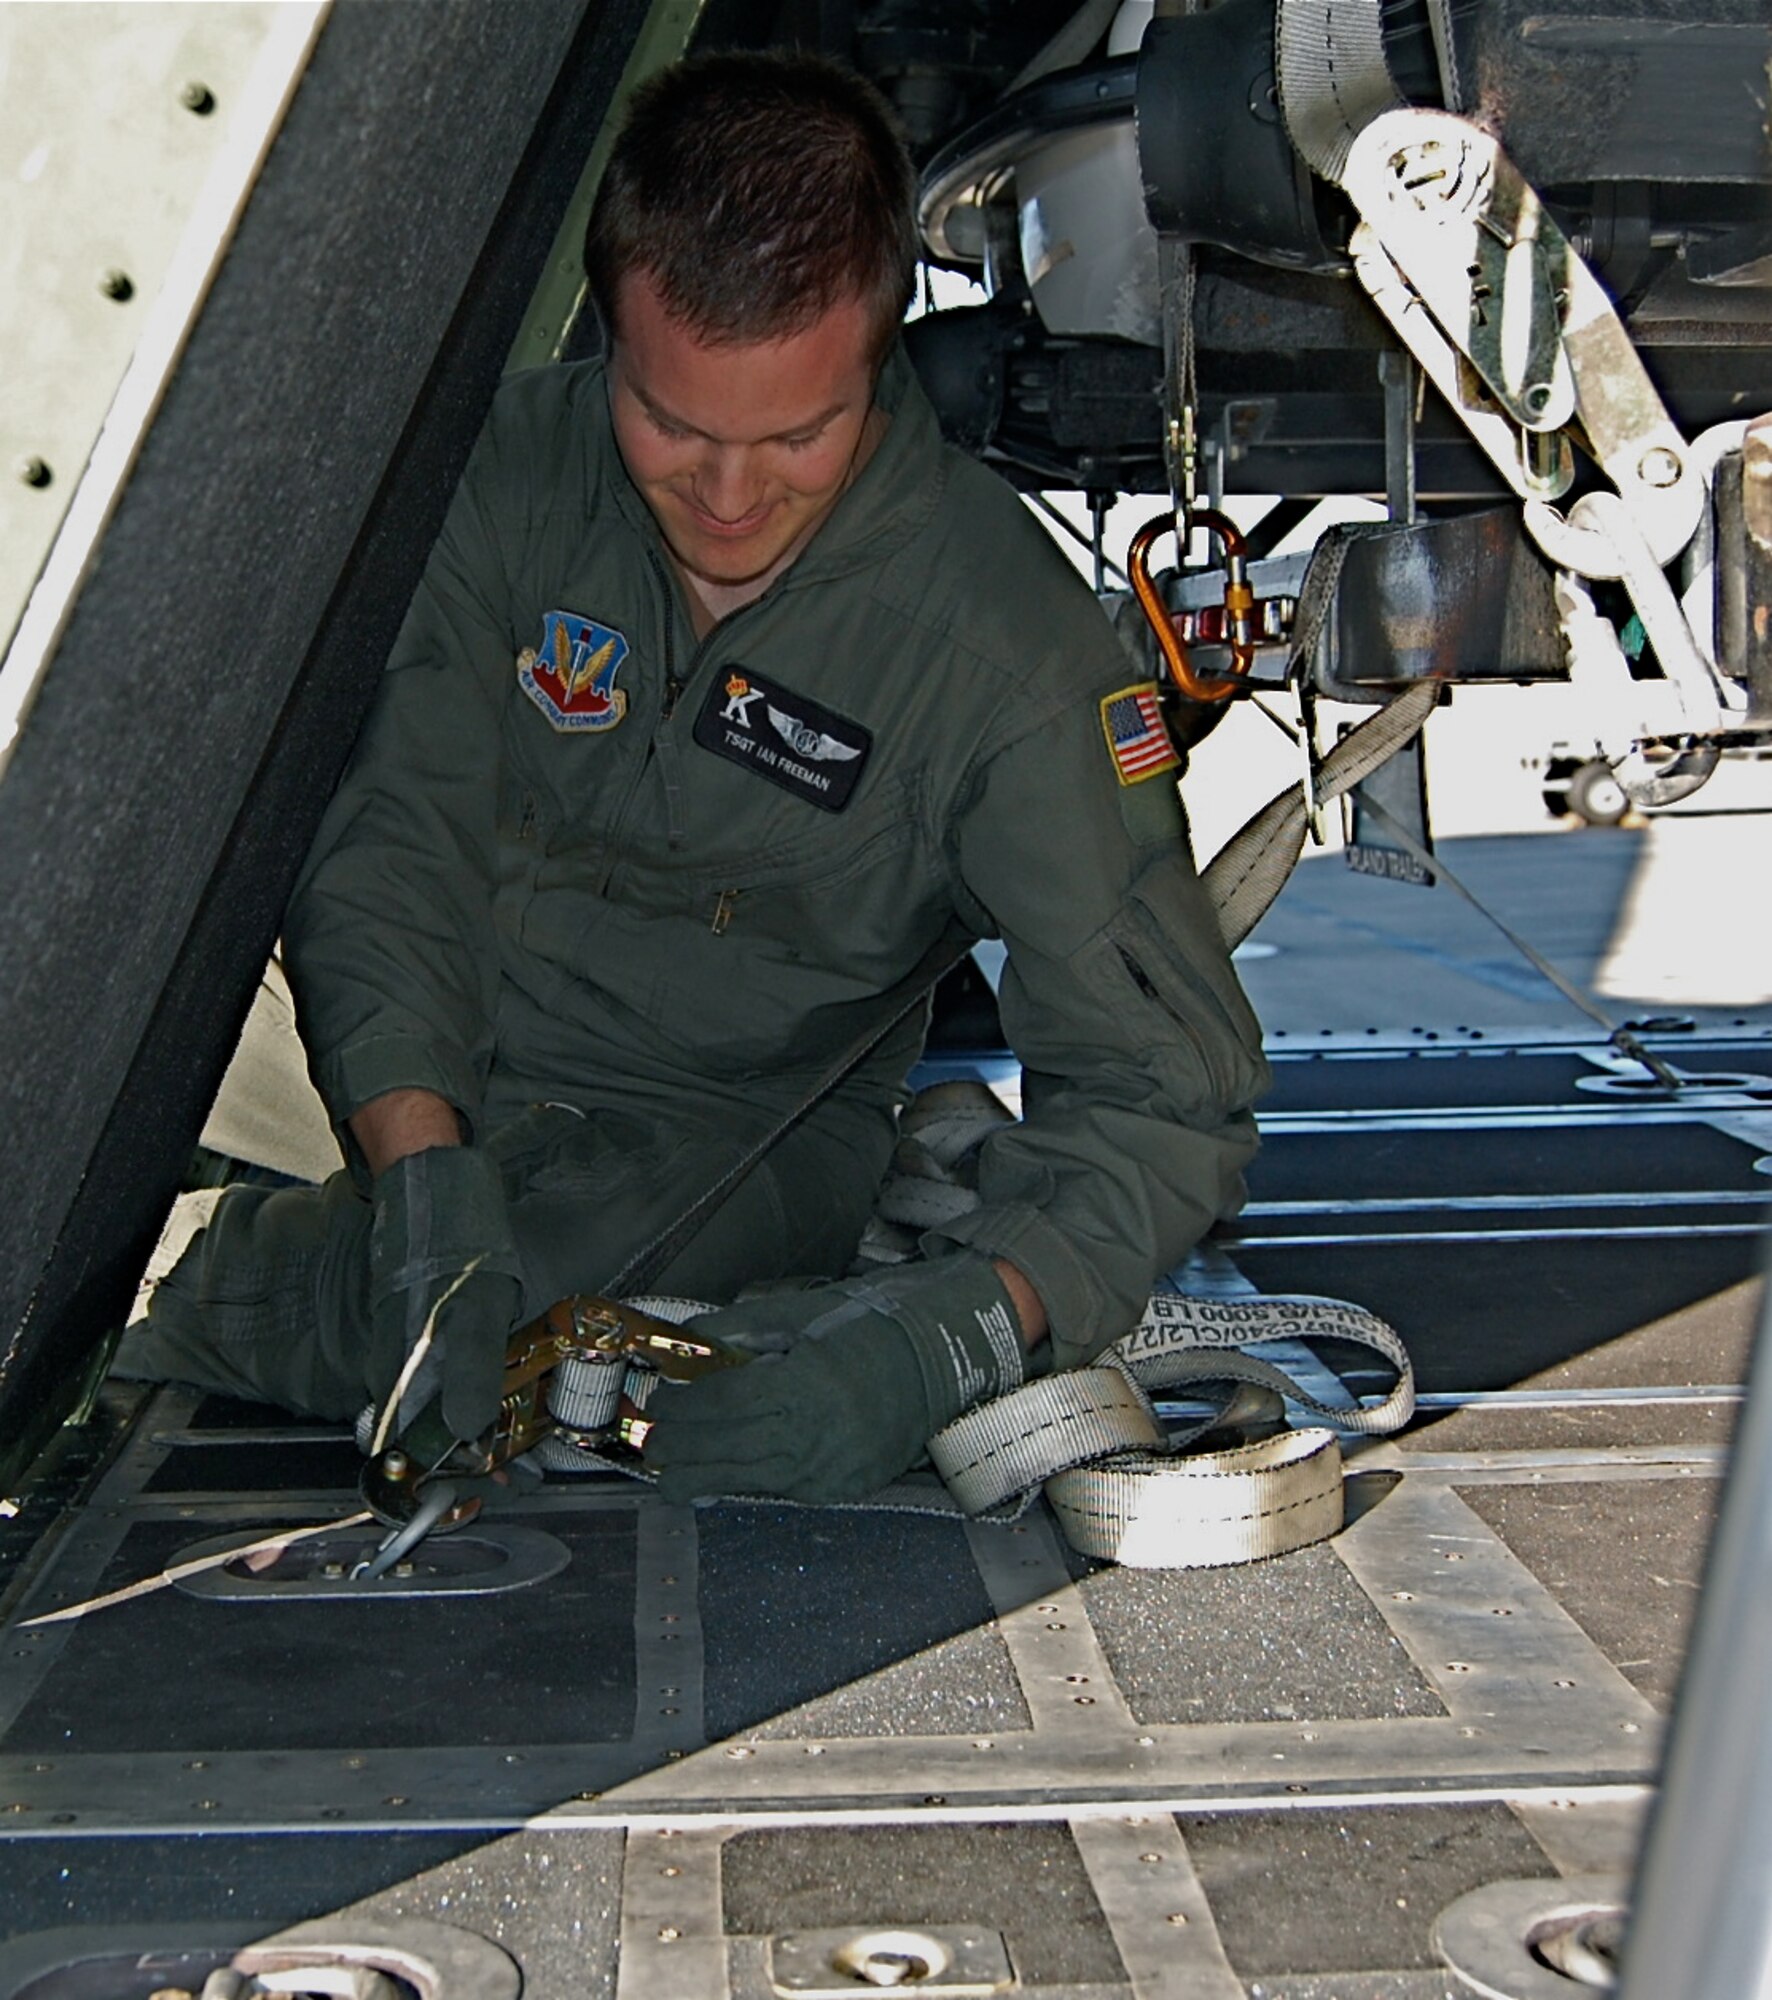 Tech. Sgt. Ian Freeman, a loadmaster with the 129th Rescue Wing, secures cargo on the deploying MC-130P Combat Shadow tanker  Sep. 1, 2008.  The 129th brought equipment including trucks, jet skis and boats for the deploying pararescue personnel to have on hand in preparation of the aftermath of Hurricane Gustav. (U.S. Air Force photo by Staff Sgt. Jill Jamgochian)